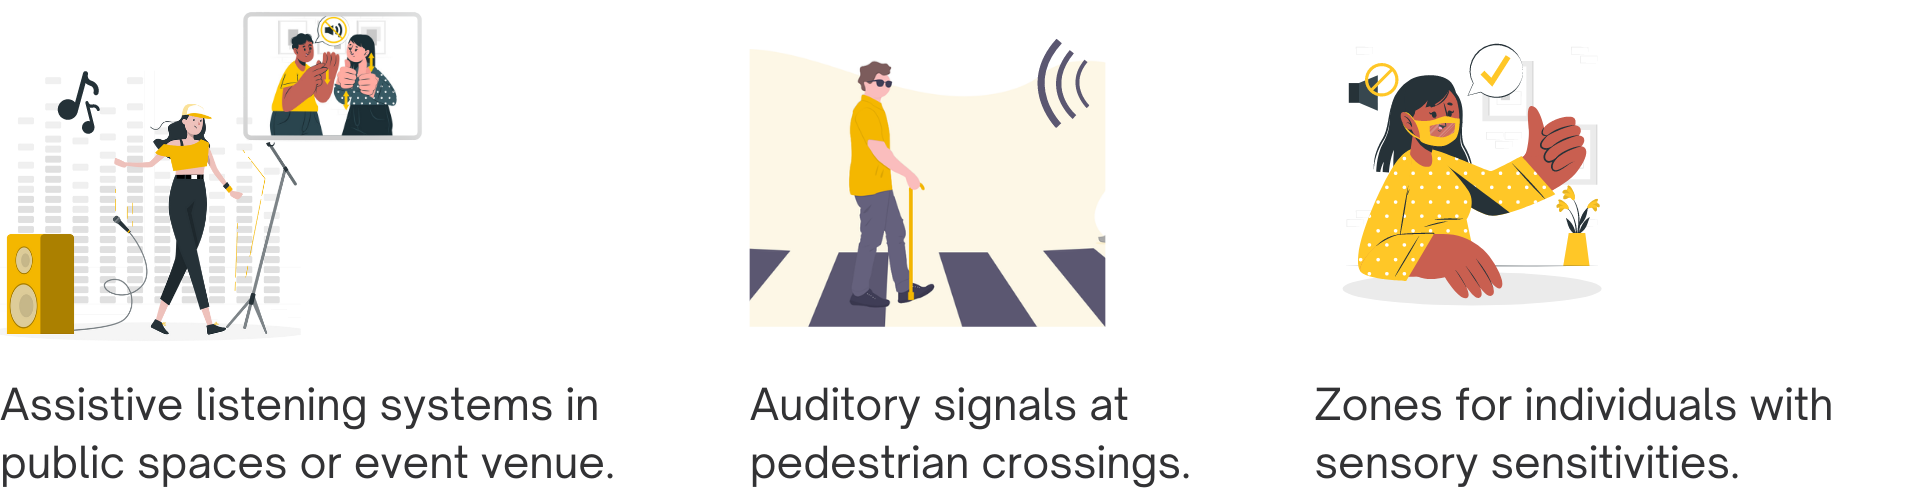 Auditory accessibility graphics (with captions)